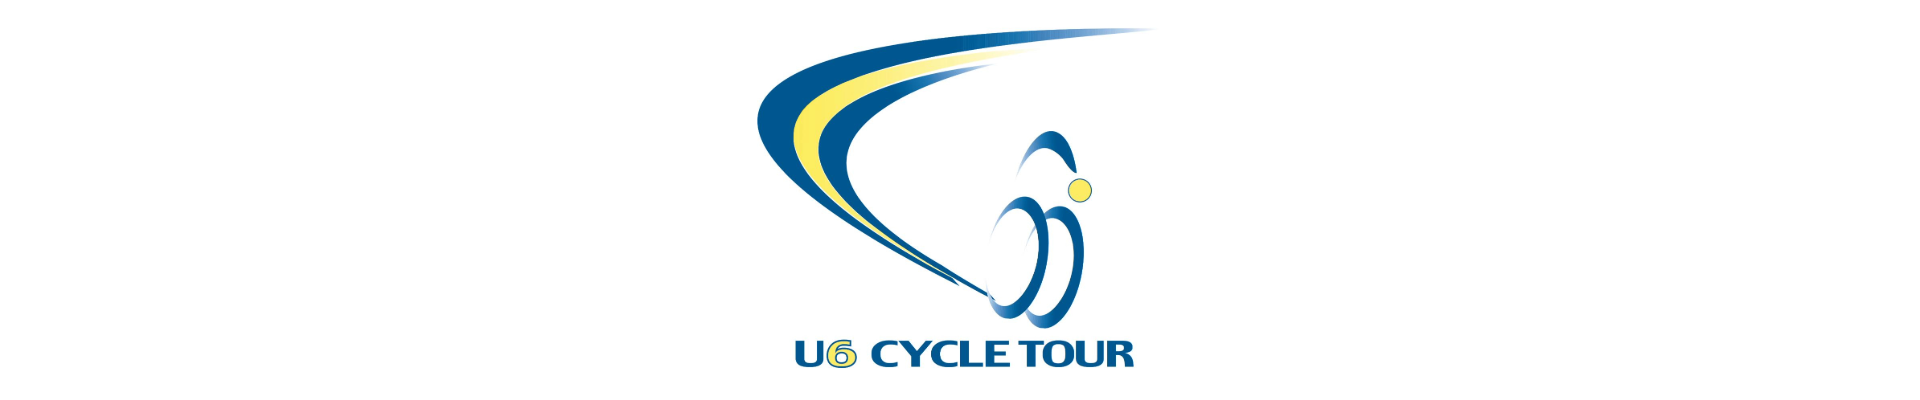 U6 Cycle Tour - stage 2